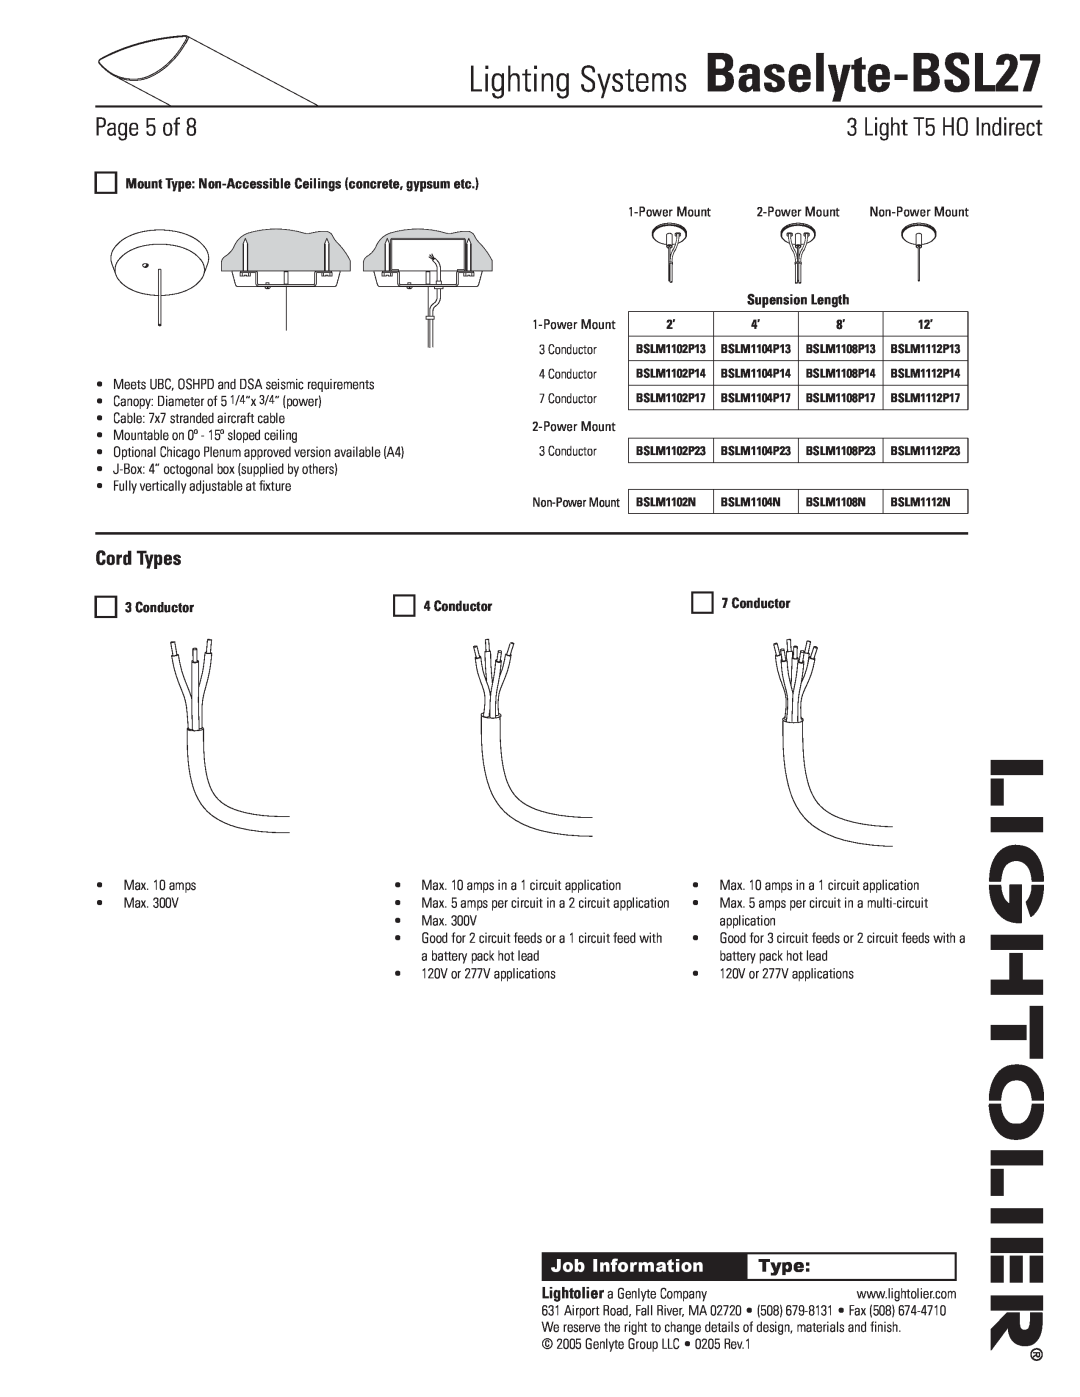 Lightolier Cord Types, Conductor, Lighting Systems Baselyte-BSL27, Page of, Light T5 HO Indirect, Job Information 